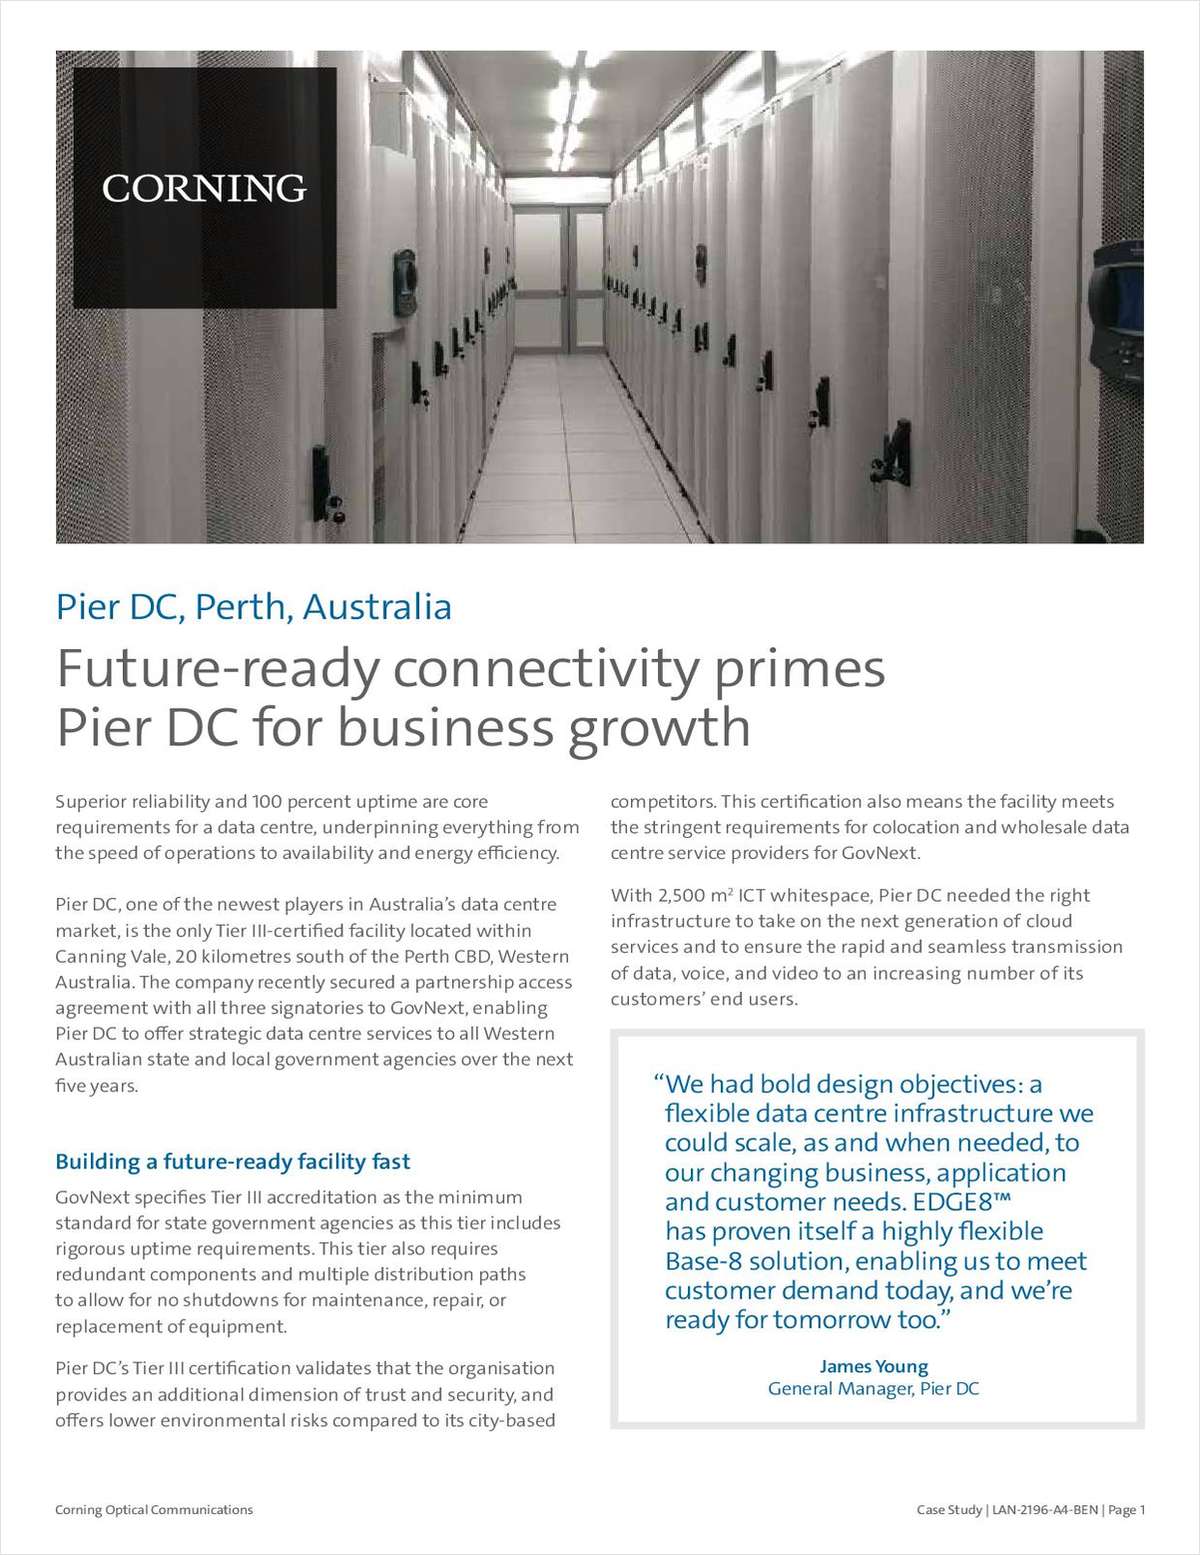 Future-ready connectivity primes Pier DC for business growth